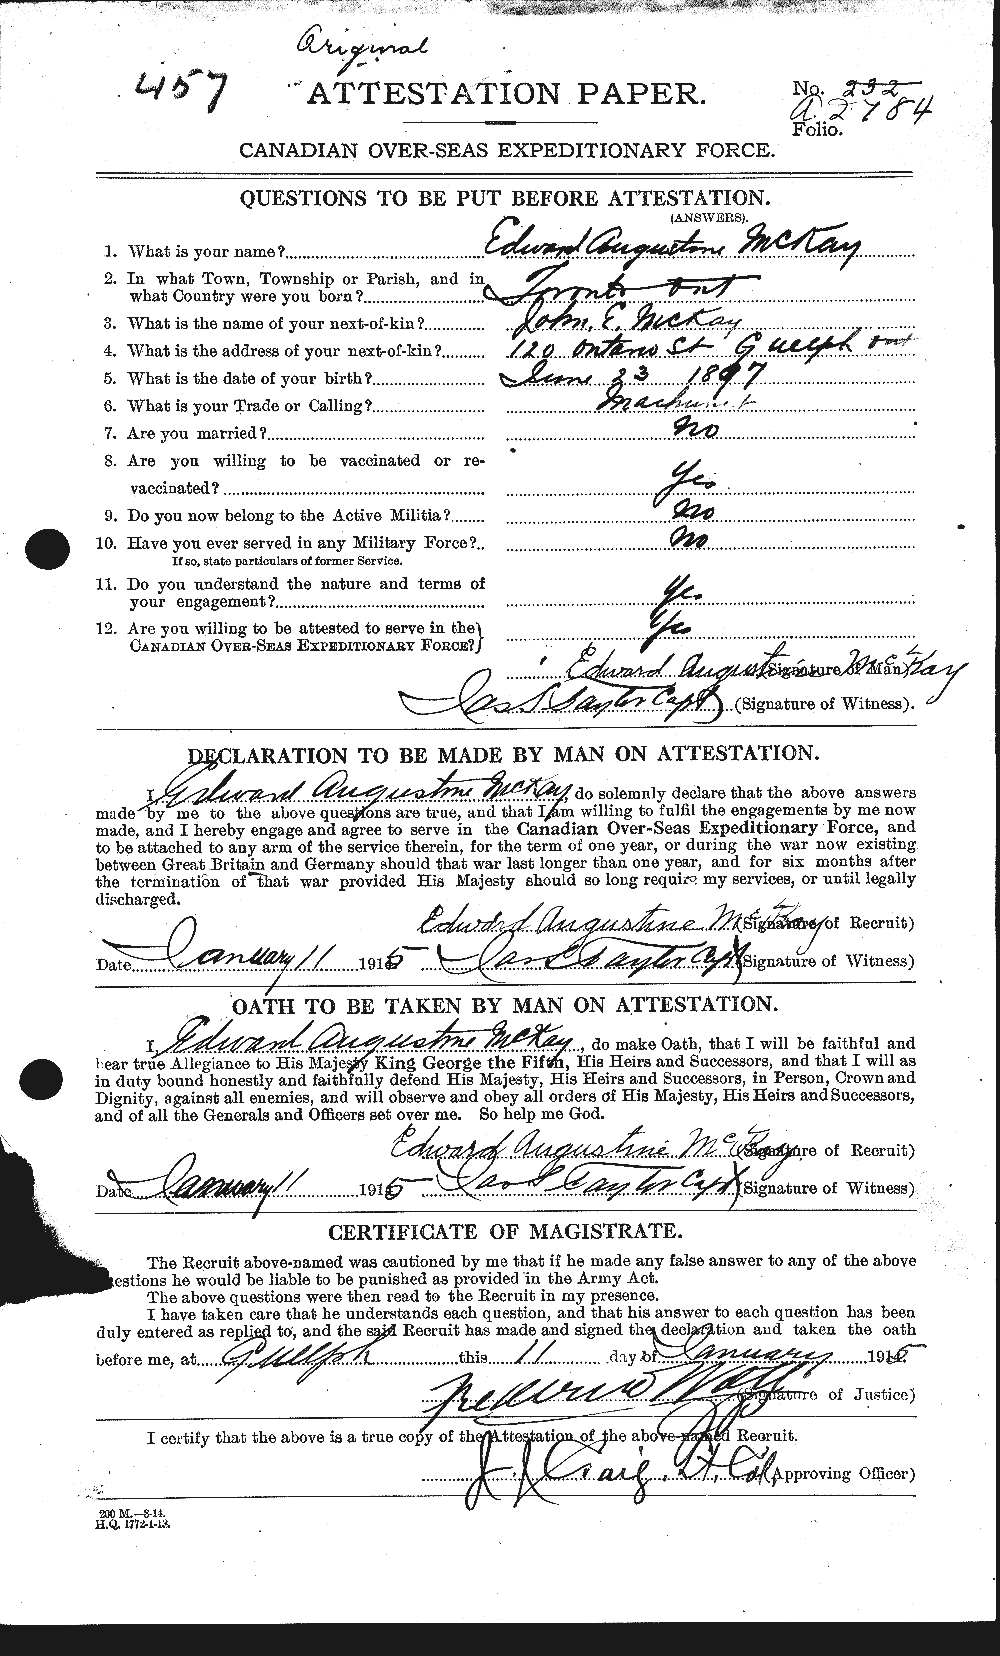 Personnel Records of the First World War - CEF 534570a